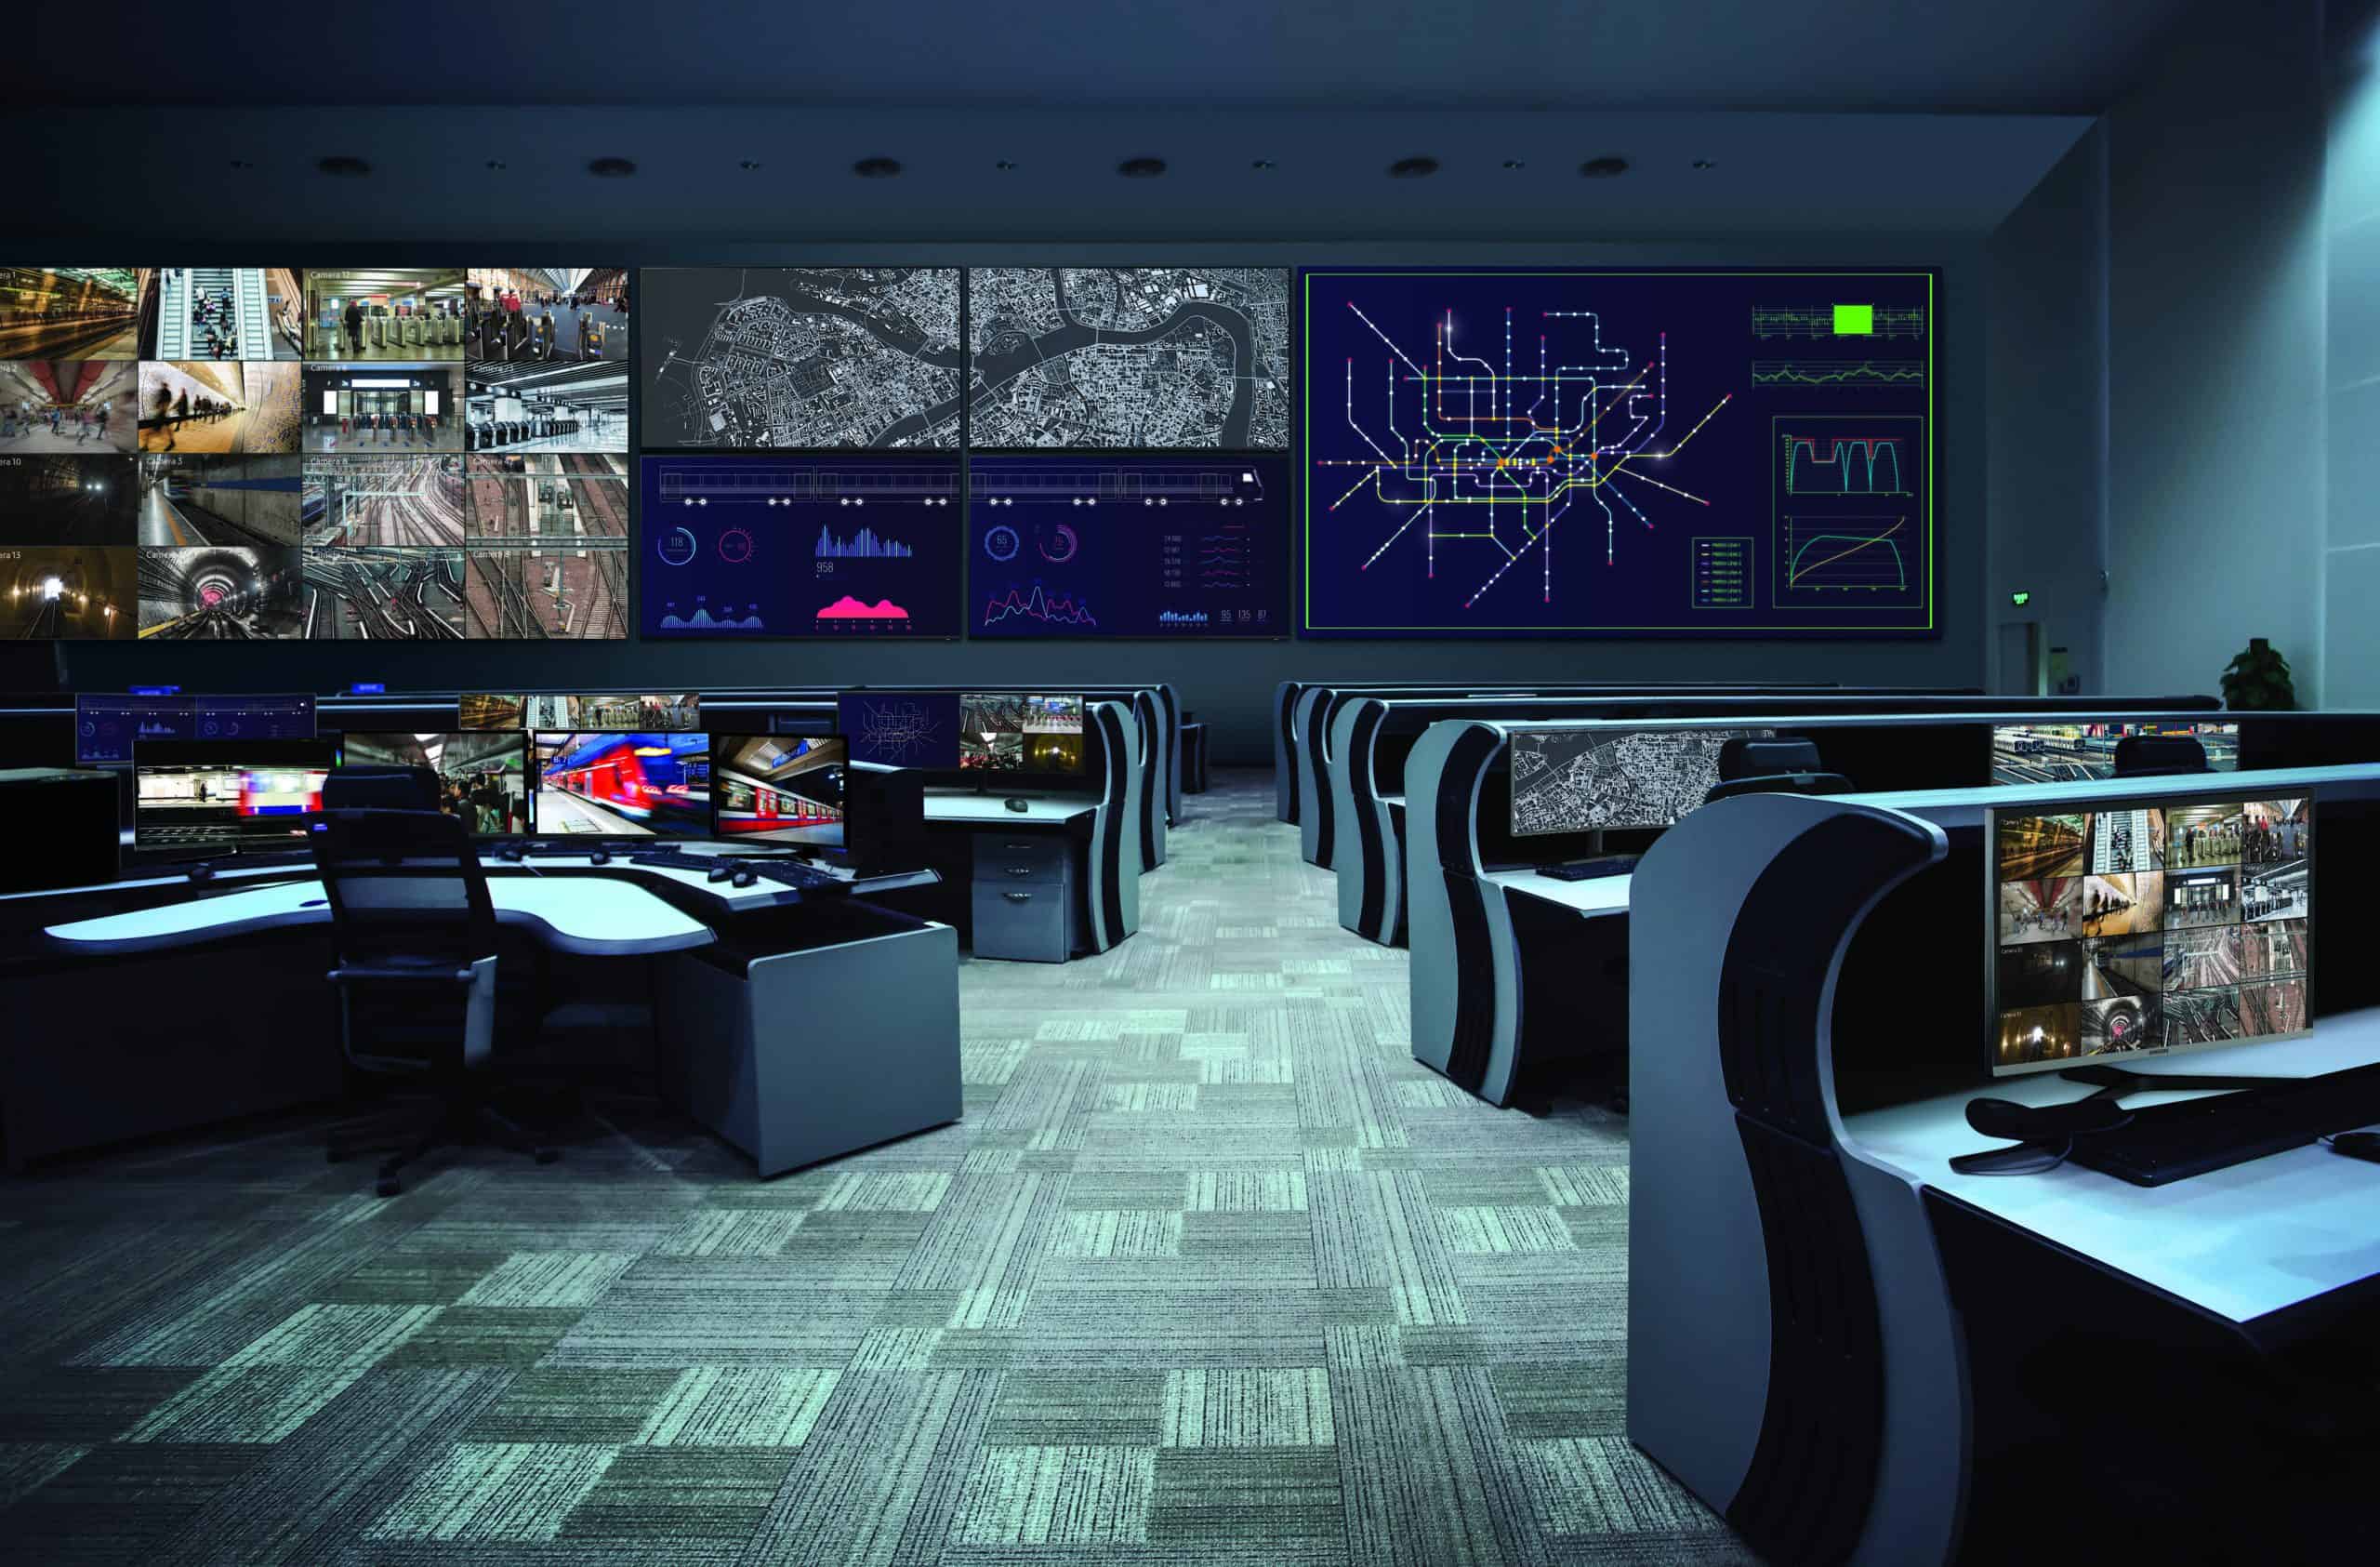 Samsung digital displays throughout a command and control center